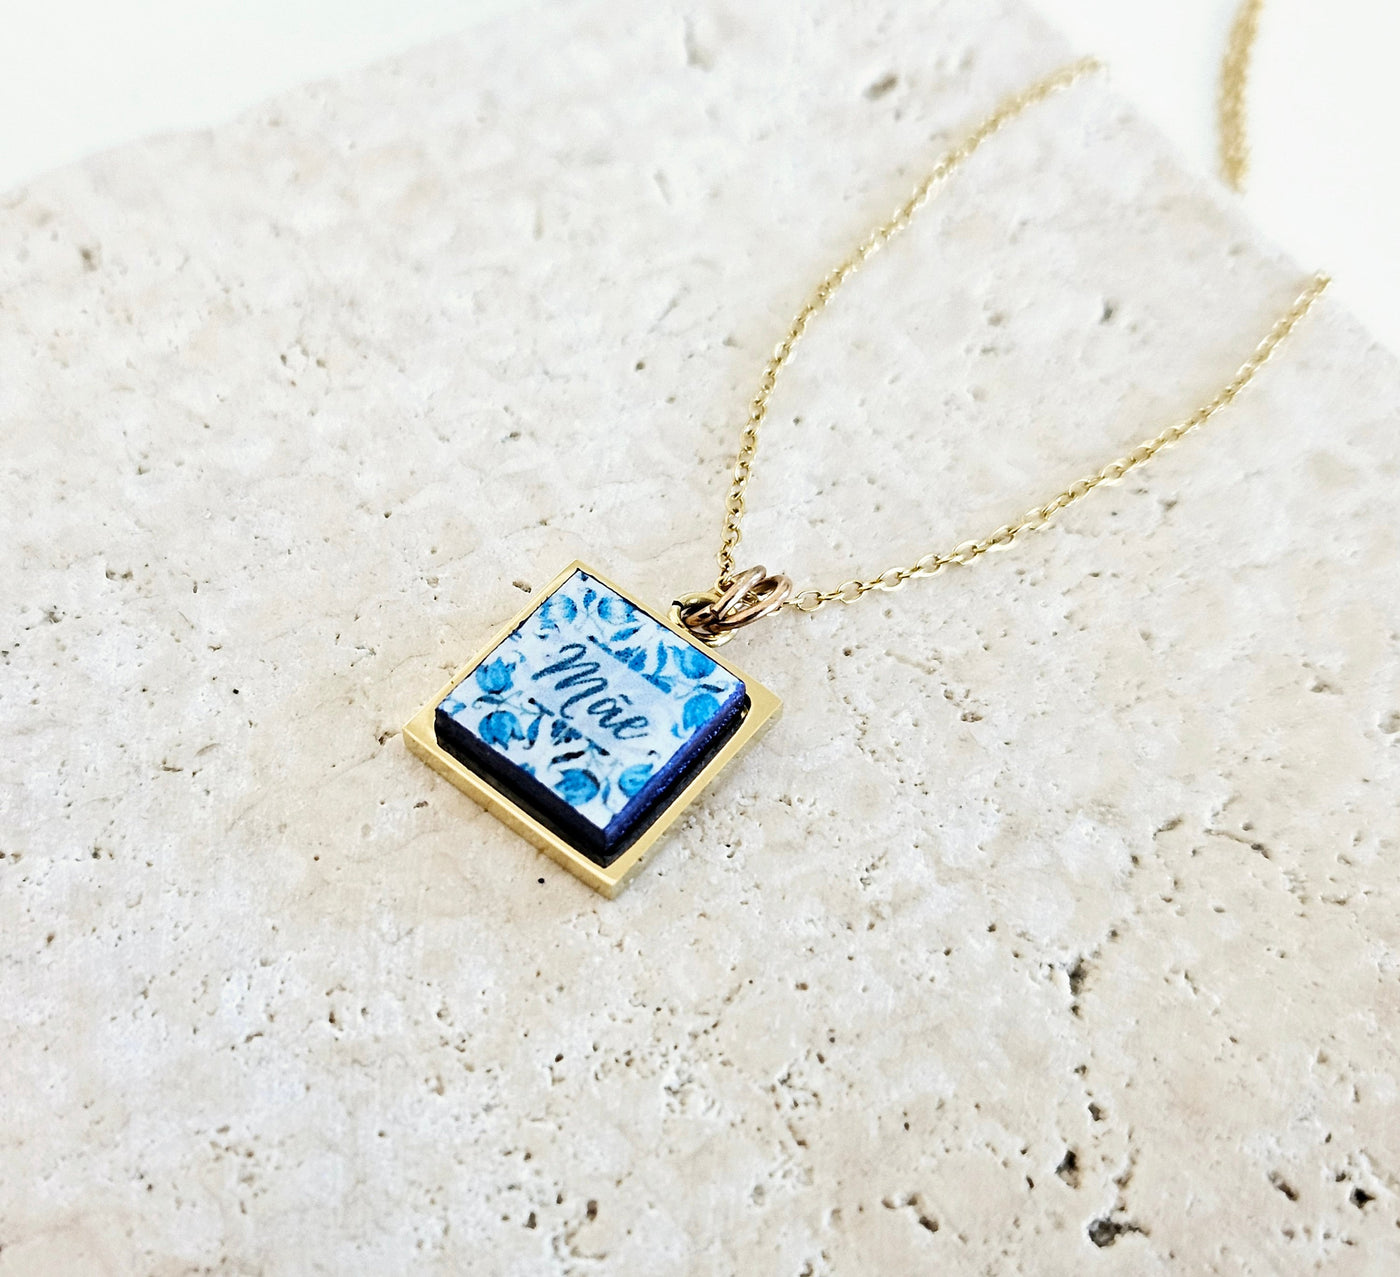 Custom Mãe Charm Tile Necklace Silver Gold Rose Gold Mom Necklace Portuguese Mom Gift Portugal Blue White Tile Azulejo Personalized Pendant